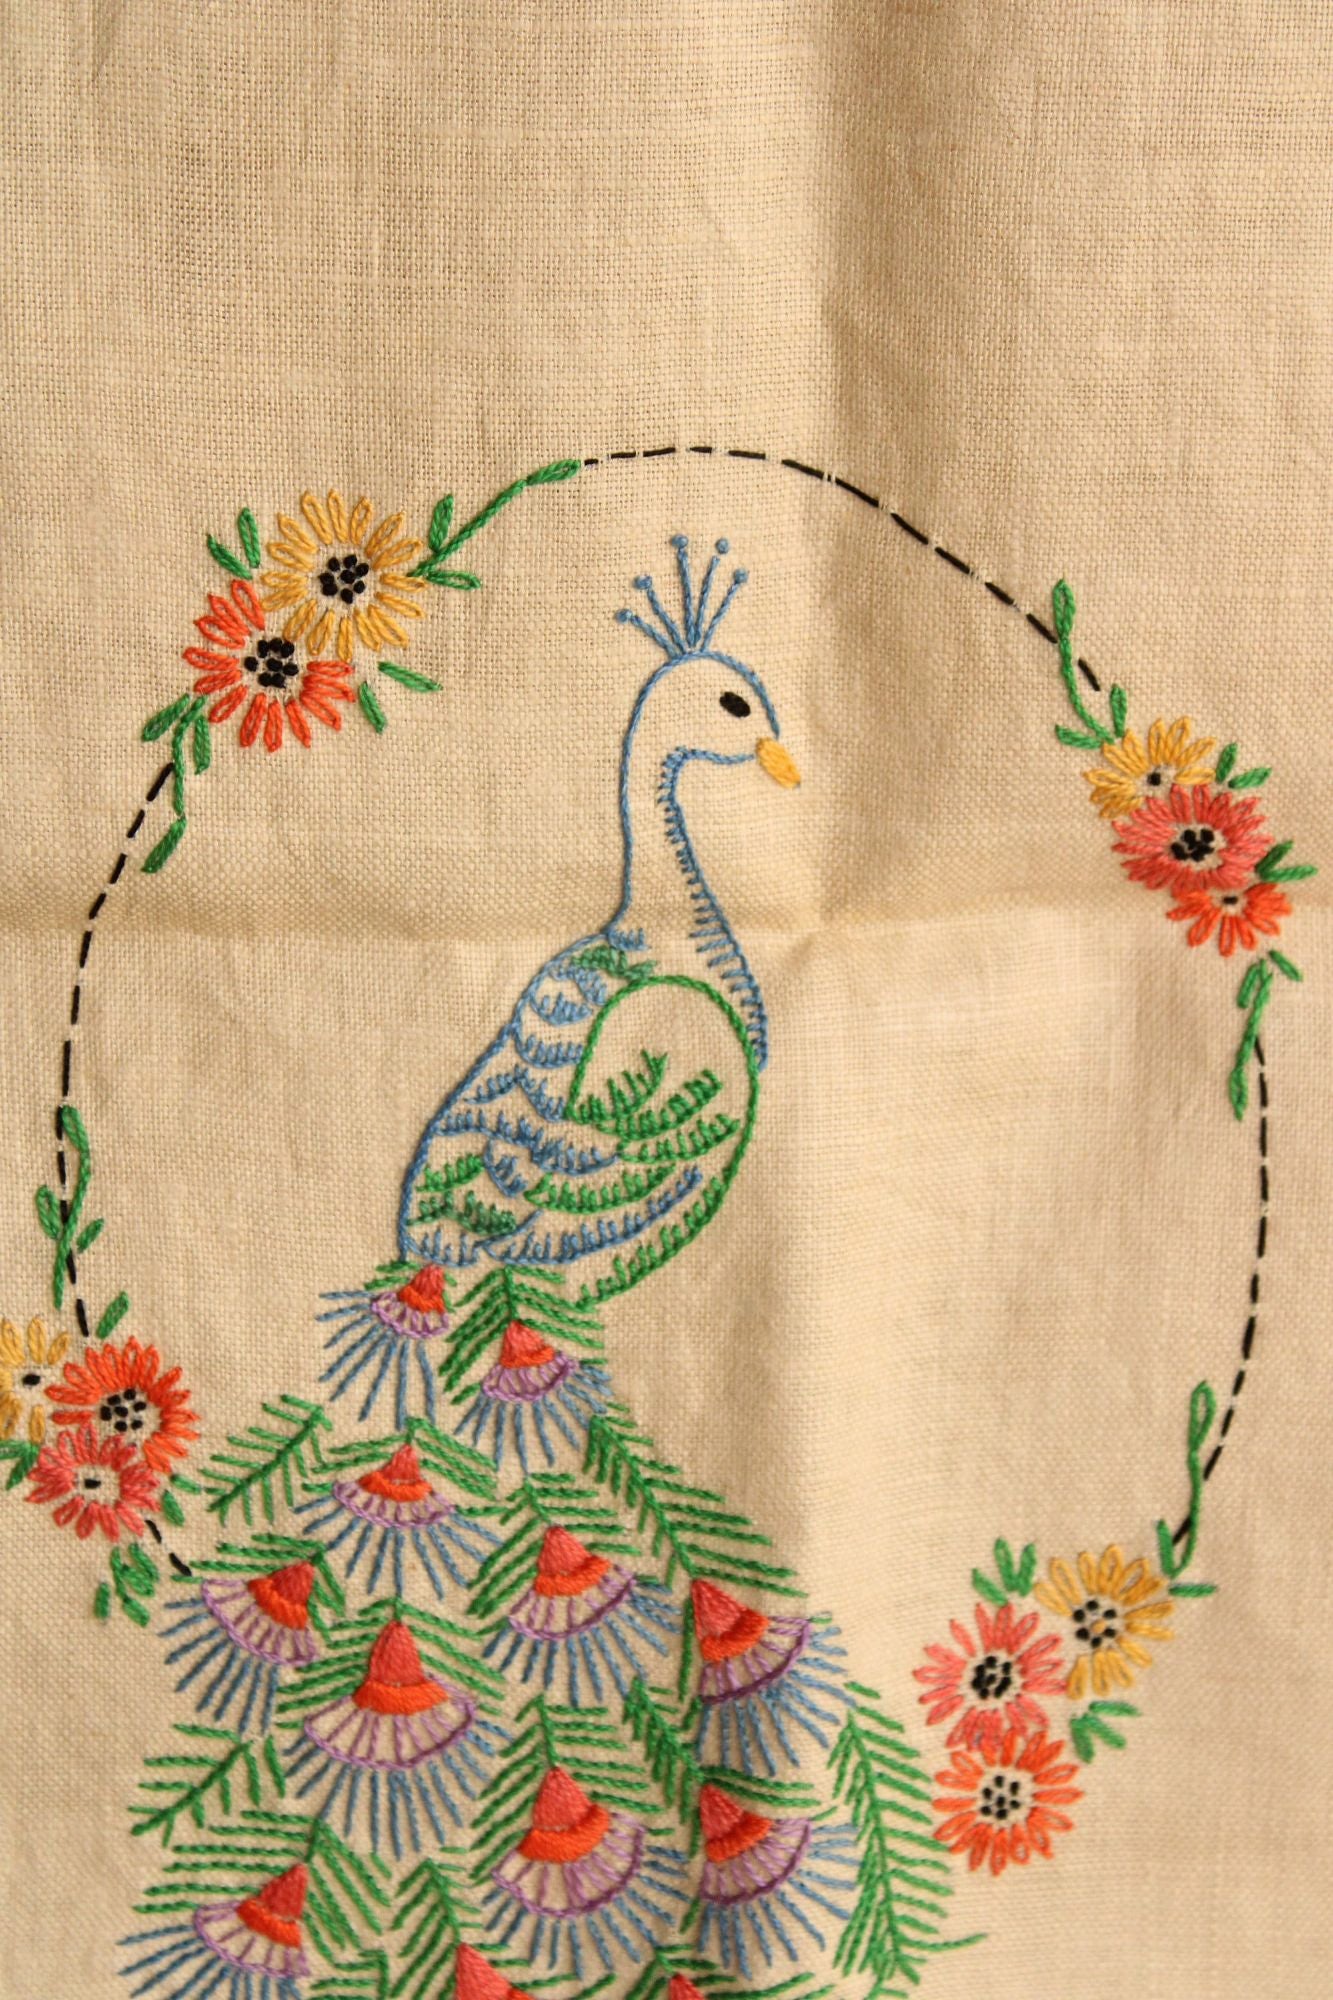 Vintage 1960s 1970s Table Runner With Embroidered Peacock and Flowers